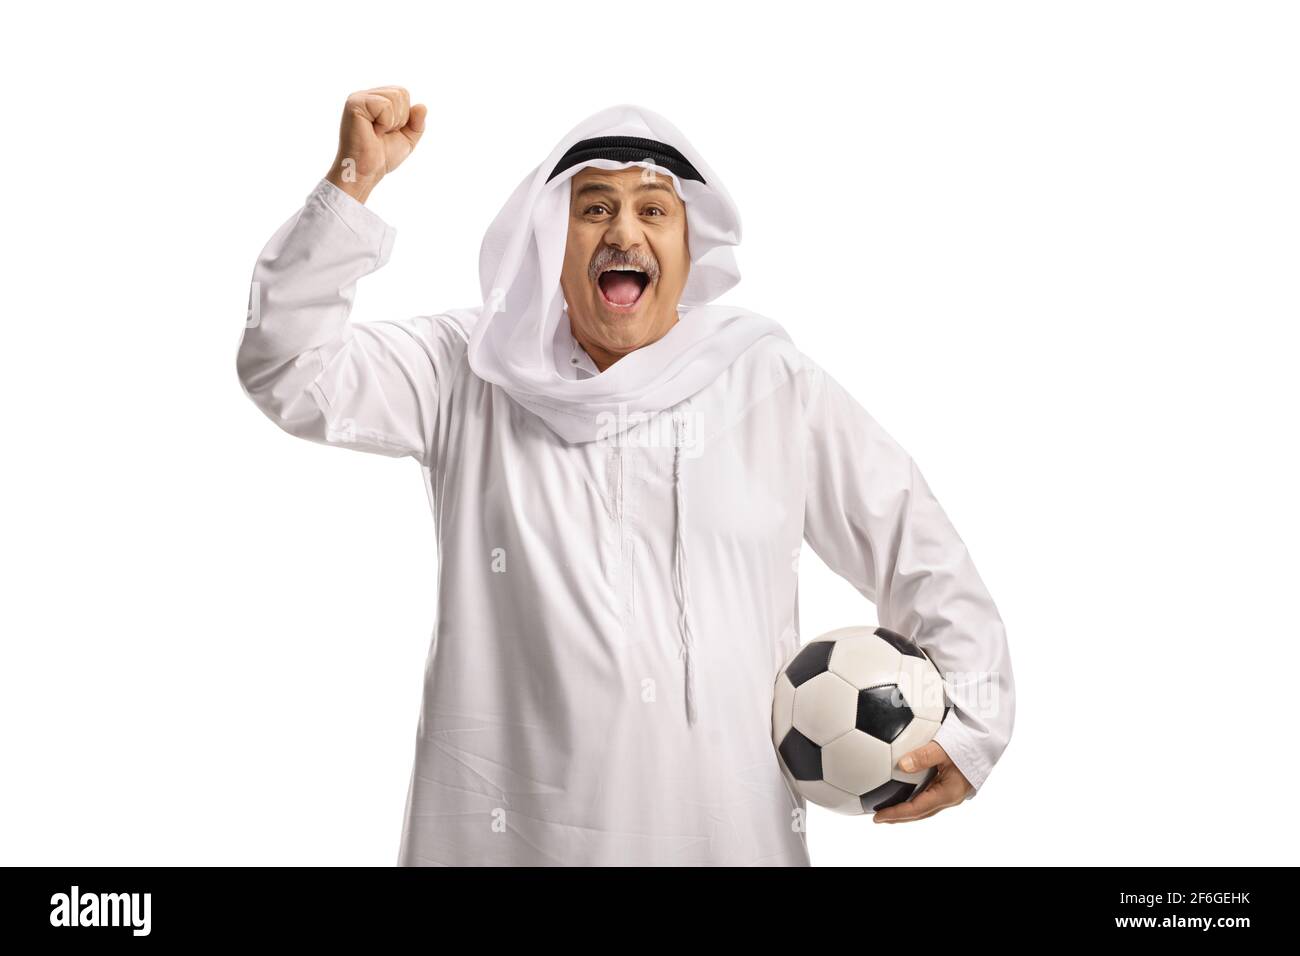 happy-mature-arab-man-with-a-soccer-ball-cheering-isolated-on-white-background-2F6GEHK.jpg